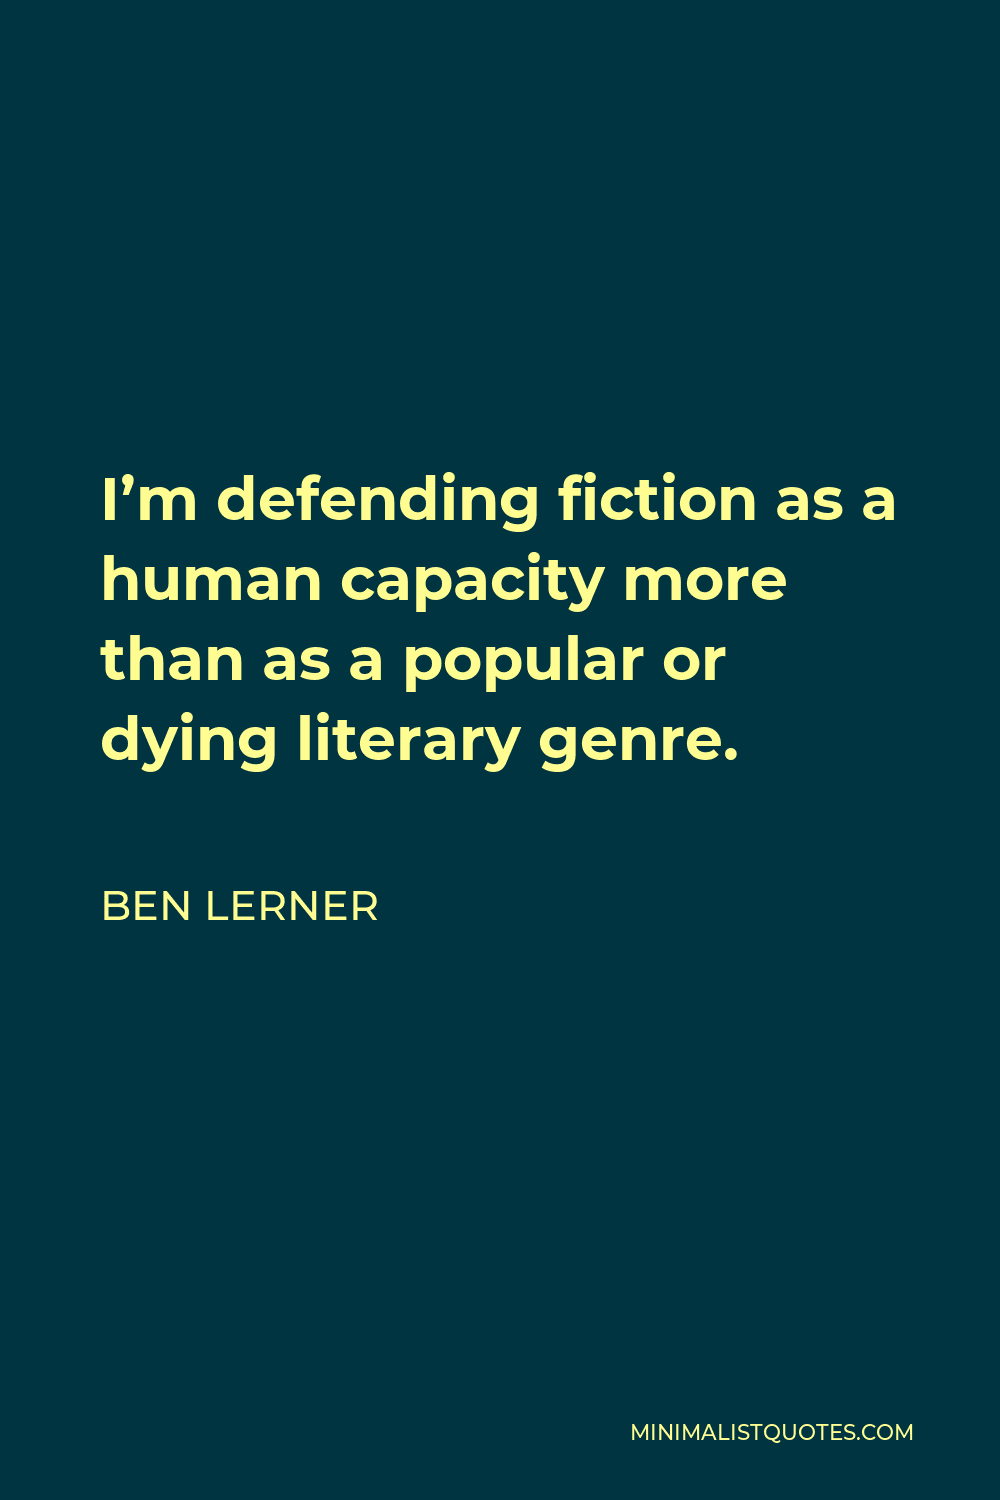 Ben Lerner Quote - I’m defending fiction as a human capacity more than as a popular or dying literary genre.